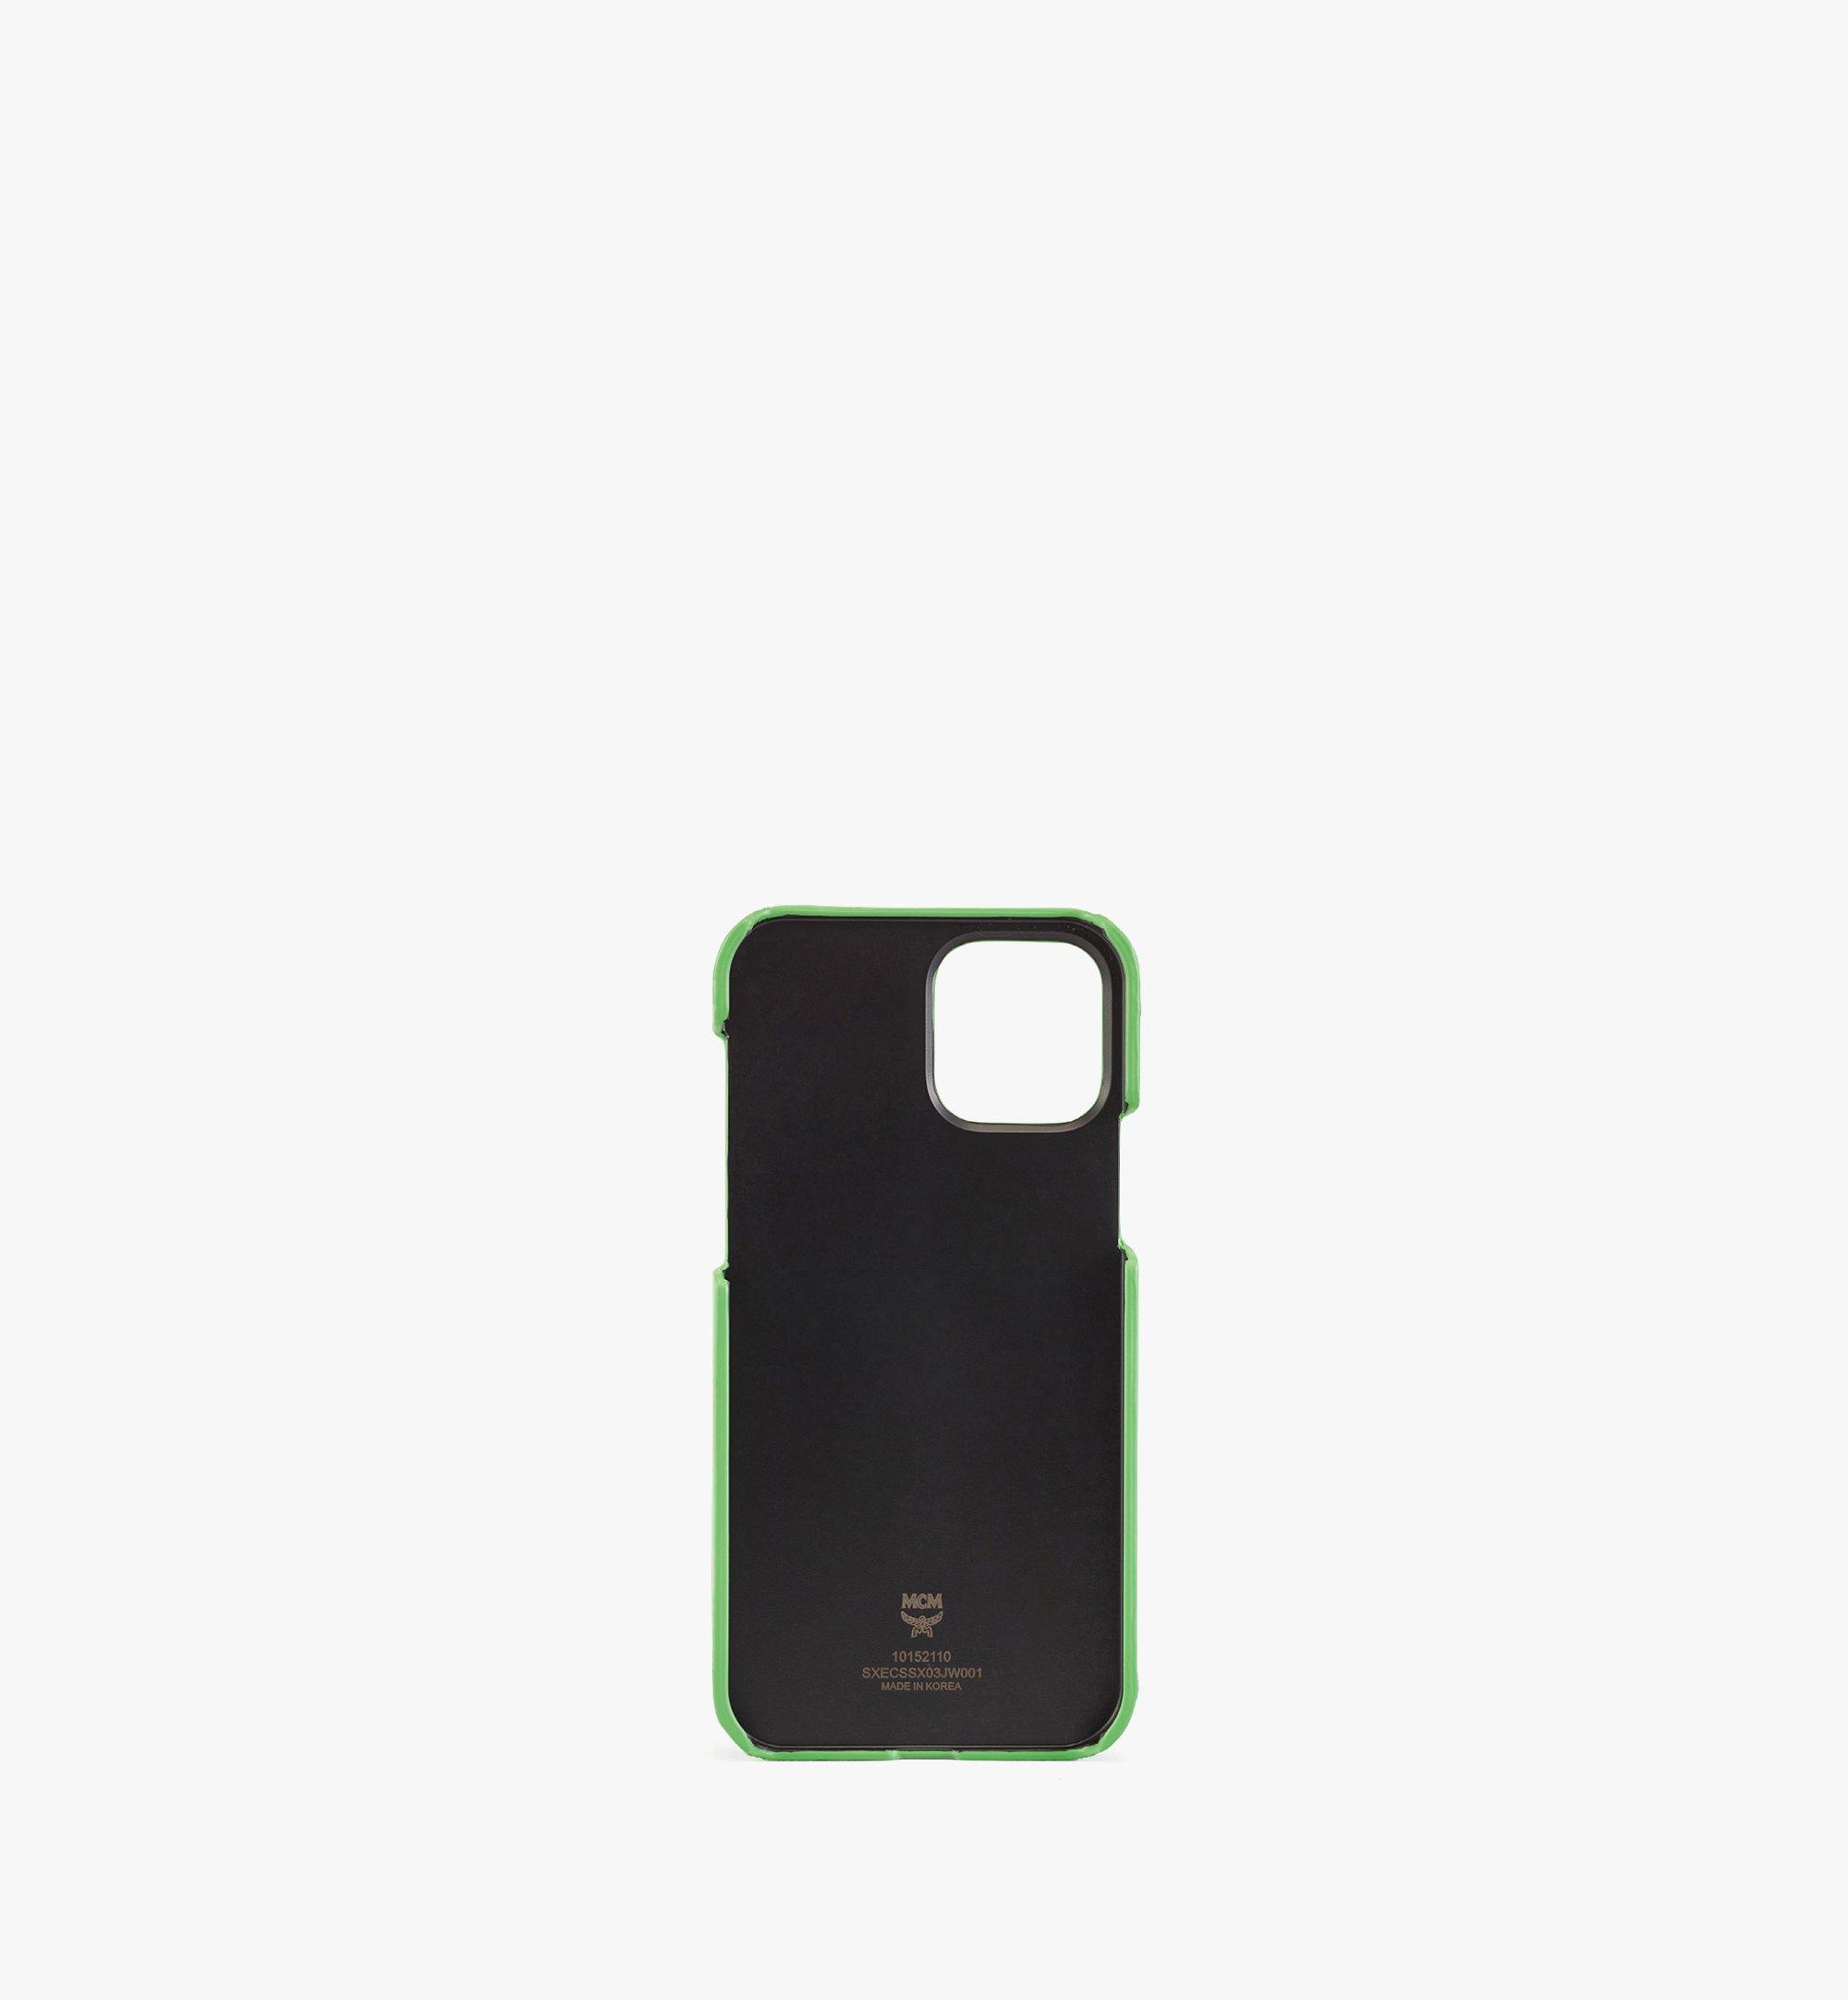 MCM M Pup iPhone 12/12 Pro Case with Card Slot Green MXECSSX03JW001 Alternate View 1